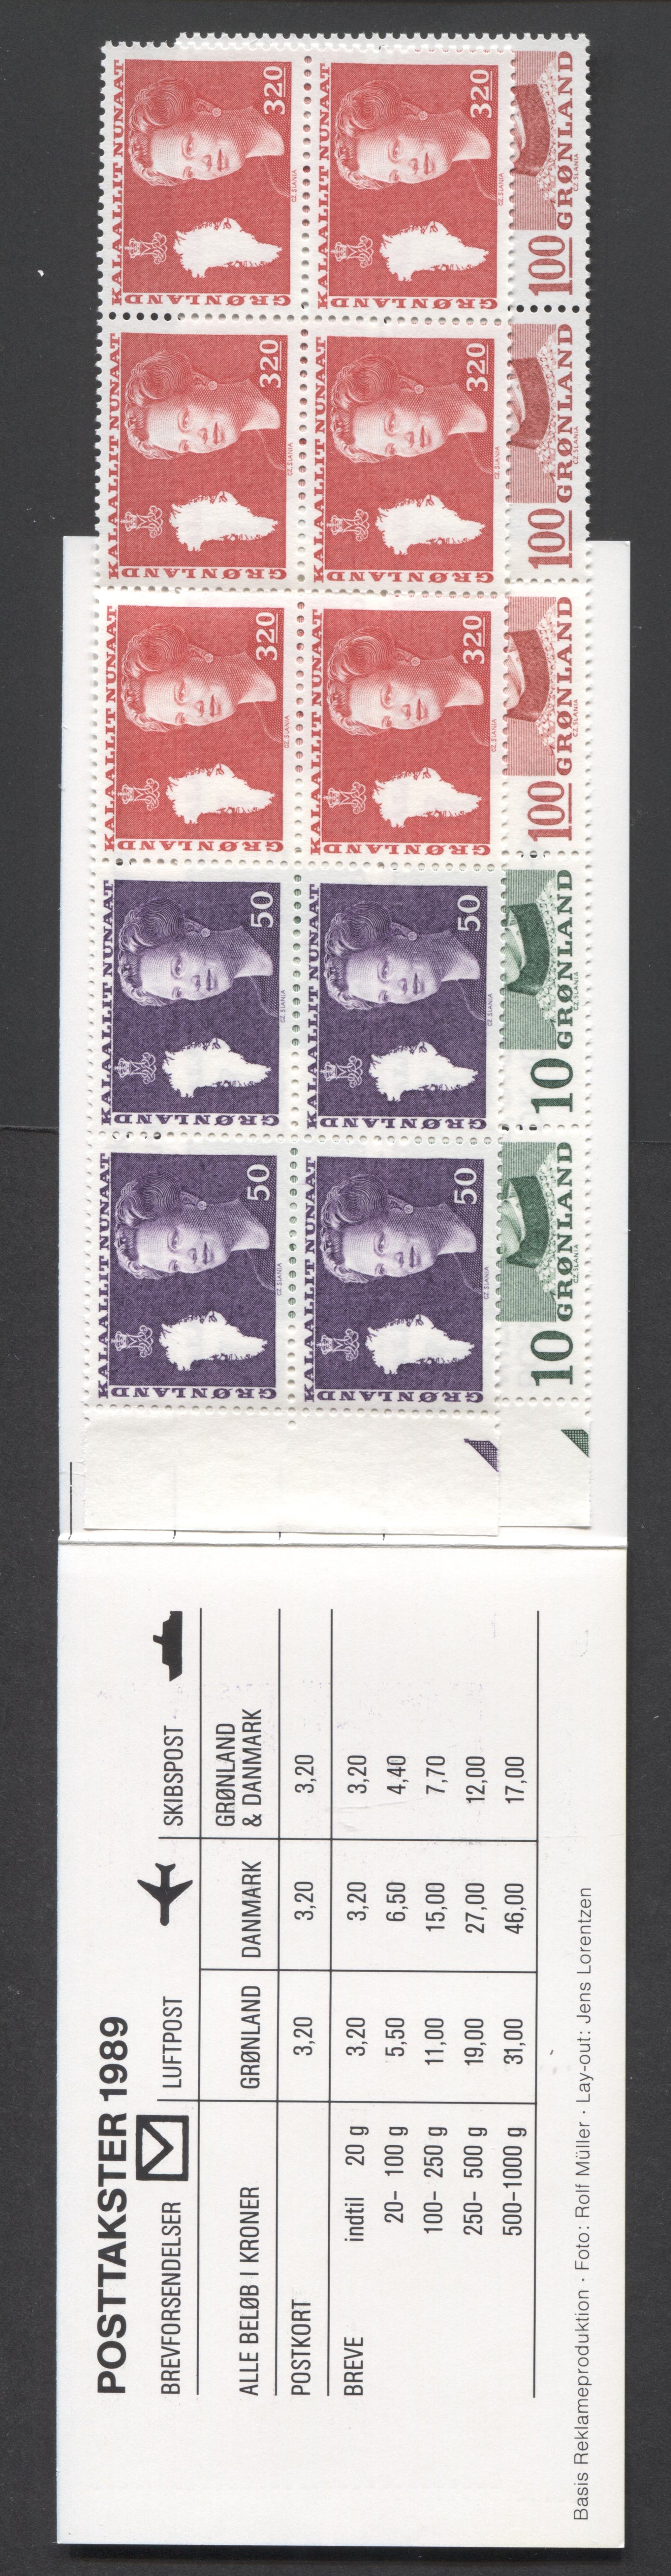 Lot 2 Greenland SC#91a-130a 1973-1989 Definitives, A VFNH Range Of Booklet With 2 Panes Of 10, 2017 Scott Cat. $80 USD, Click on Listing to See ALL Pictures